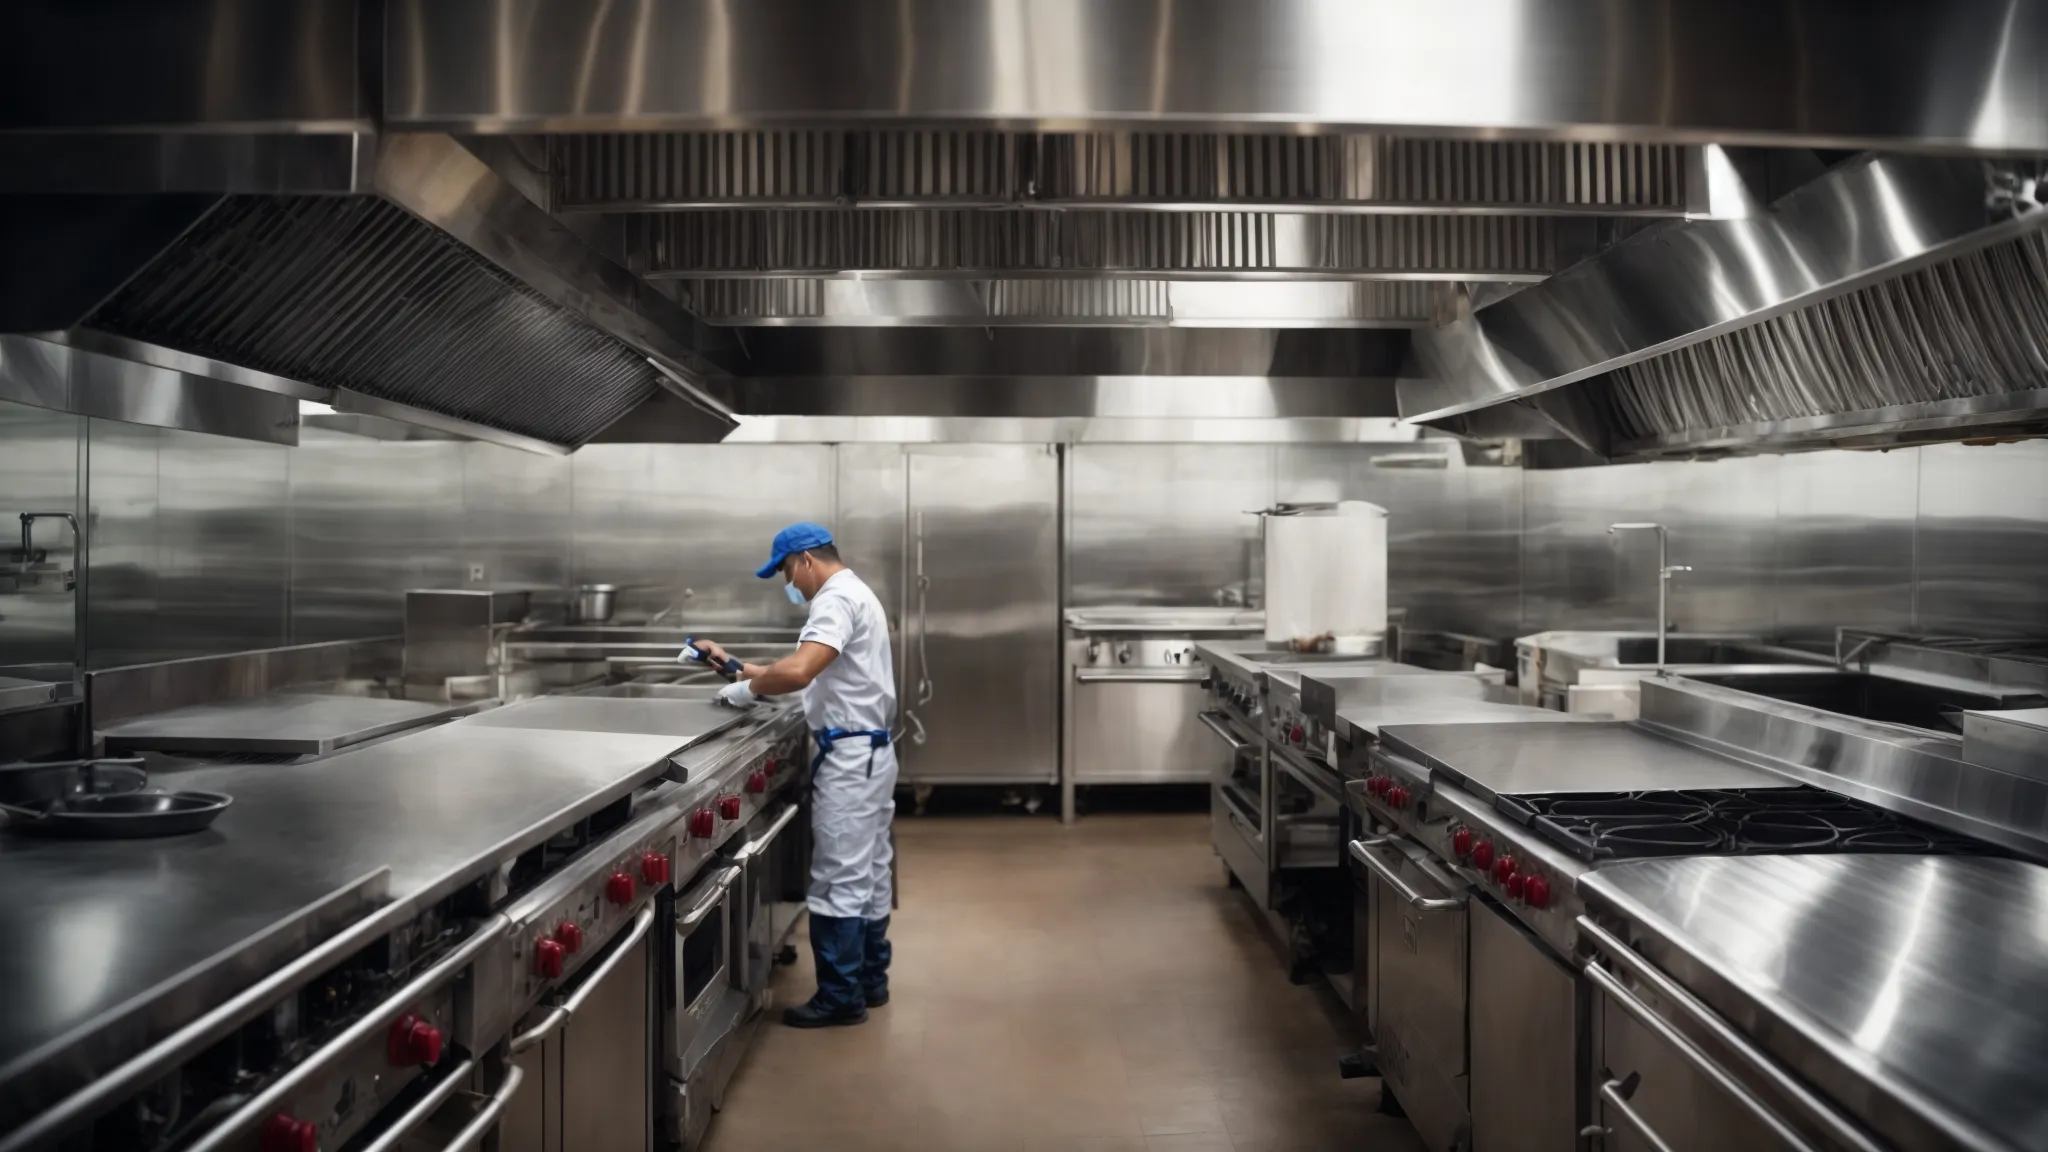 a professional cleaner power-washing the inside of a large commercial kitchen hood, surrounded by stainless steel appliances.